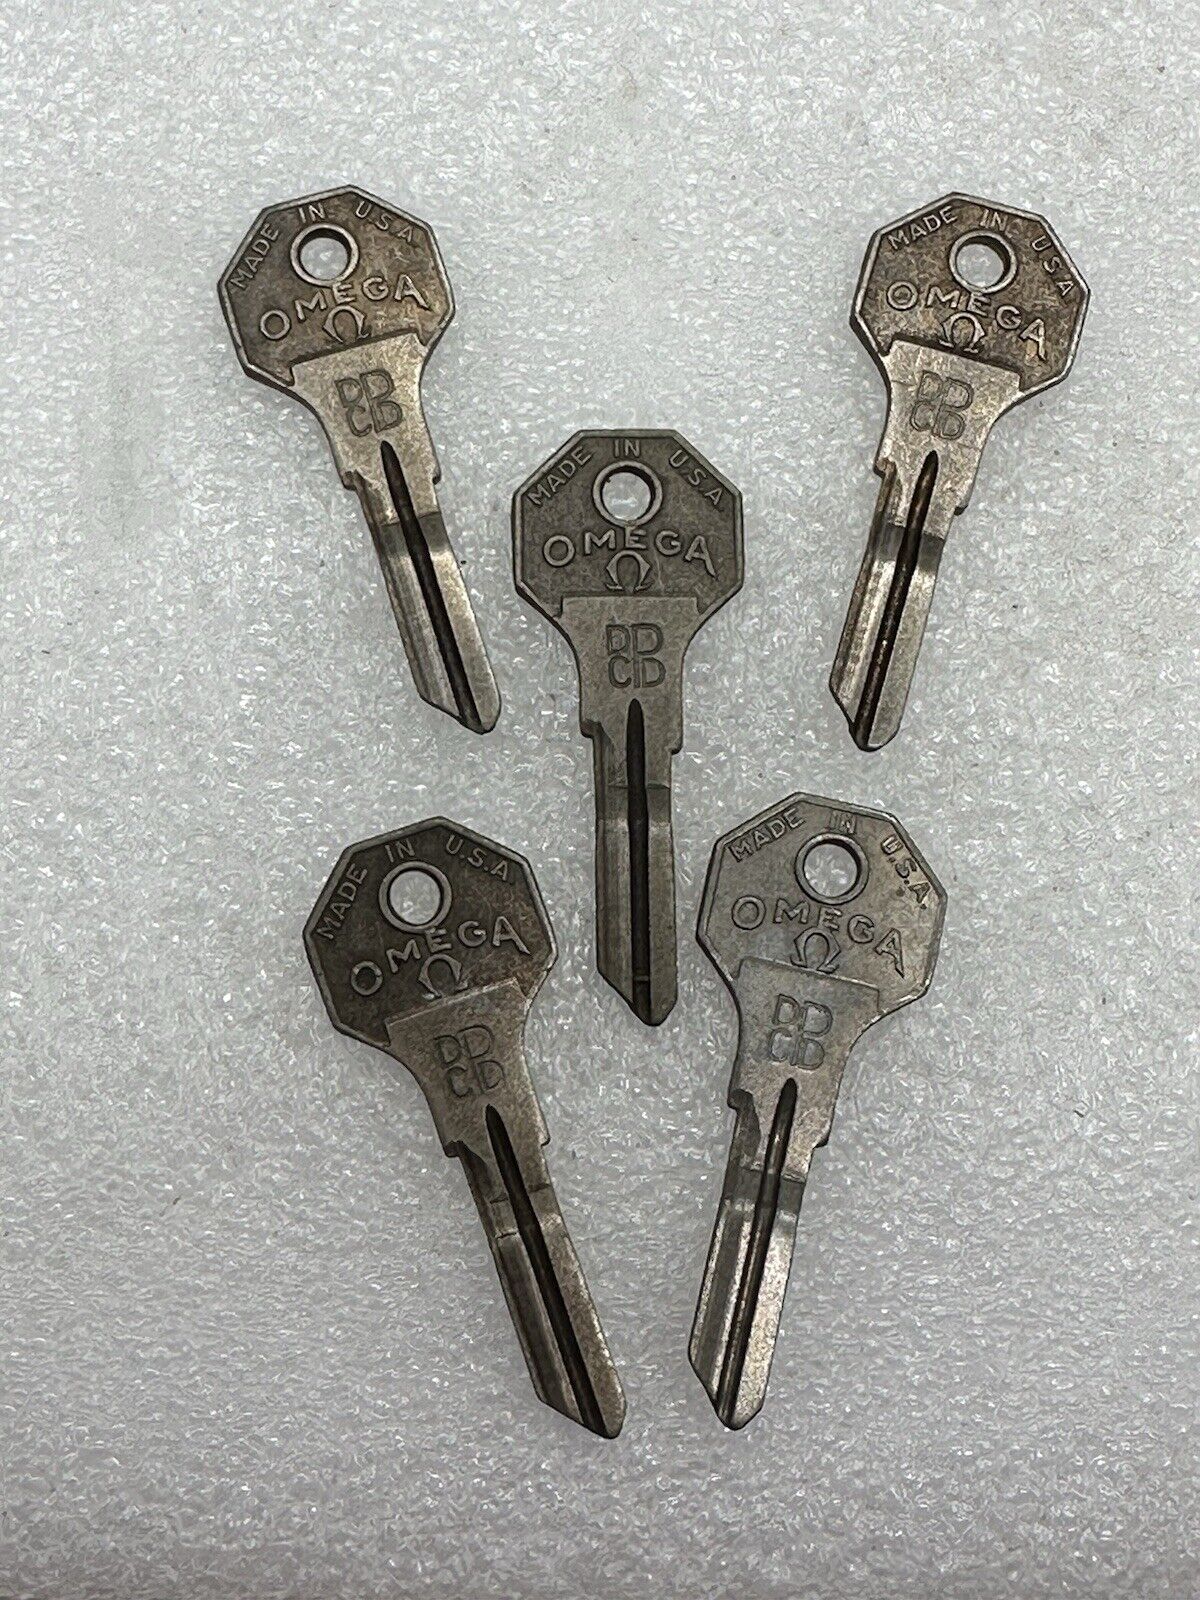 Lot Of 5 Yale & Towne Omega DPCD XC Key Blanks For 1933 Chrysler Plymouth Dodge